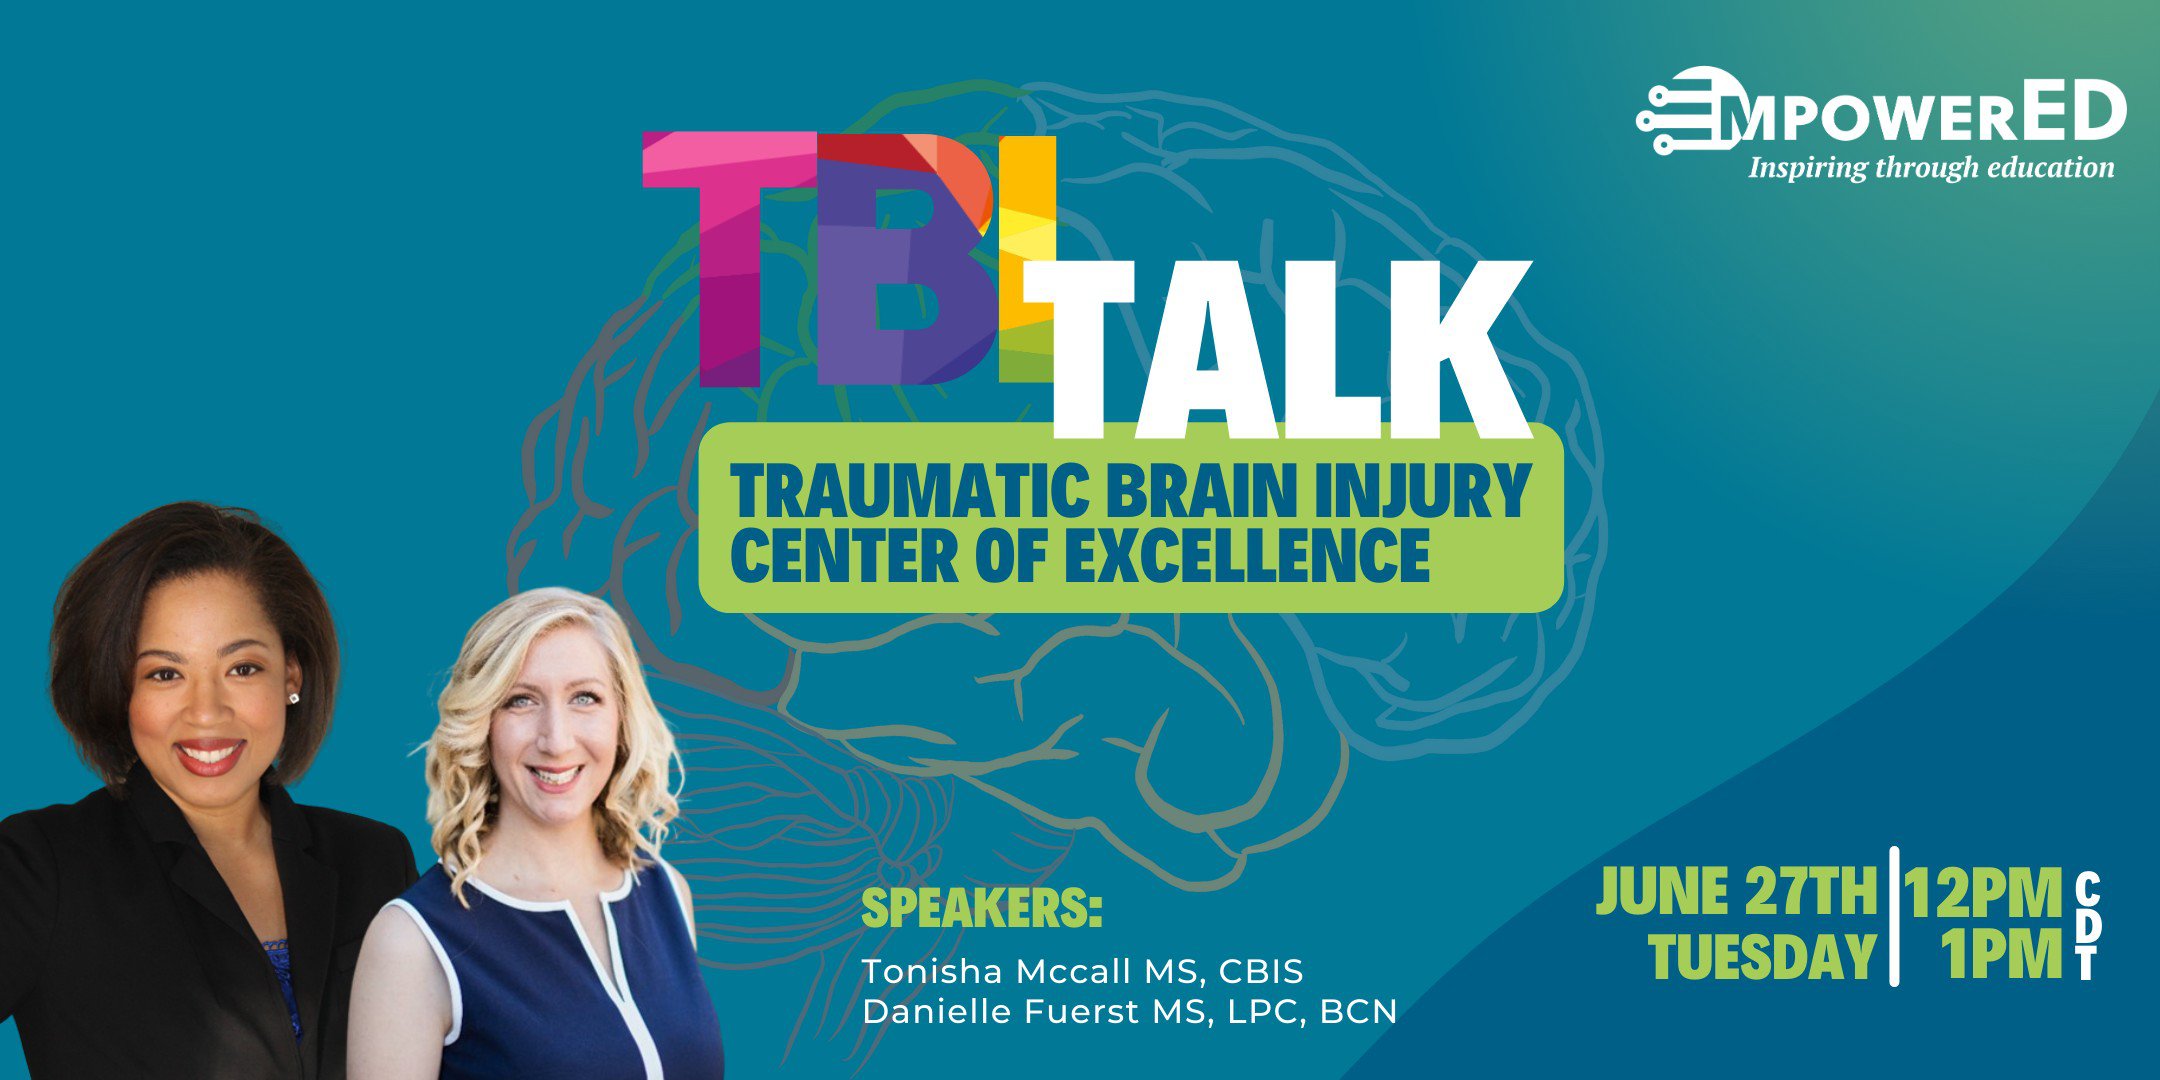 TBI Chat on June 27th at 12pm CDT